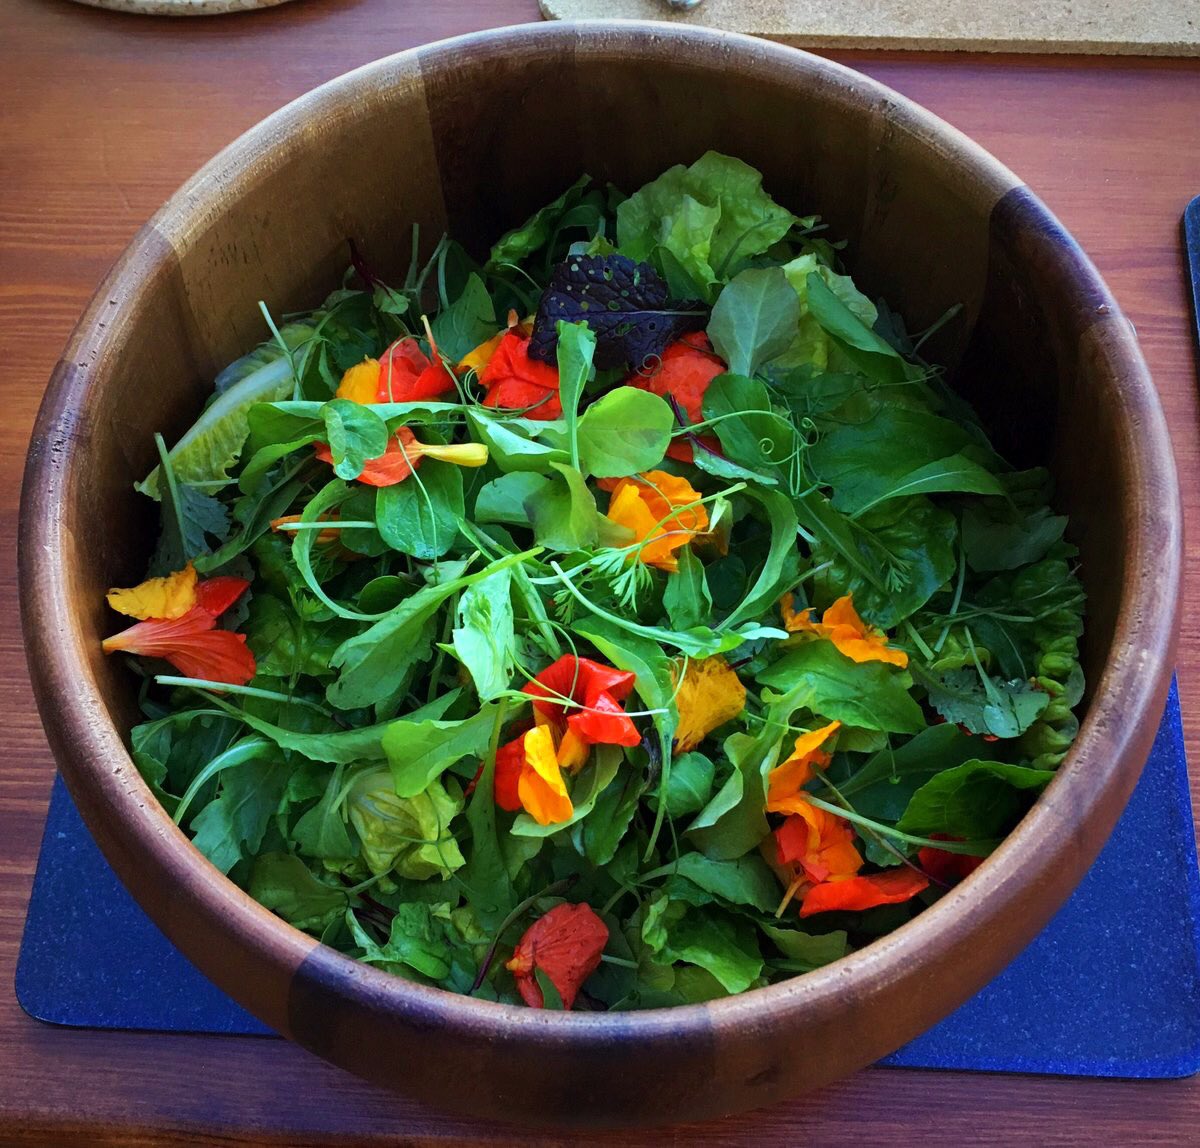 We used the seed thinnings in our salad @ArunKapilspice Carrot, Beetroot, Rocket, Mixed Leaves, Nasturtiums, Mustard. @darinaallen inspired.